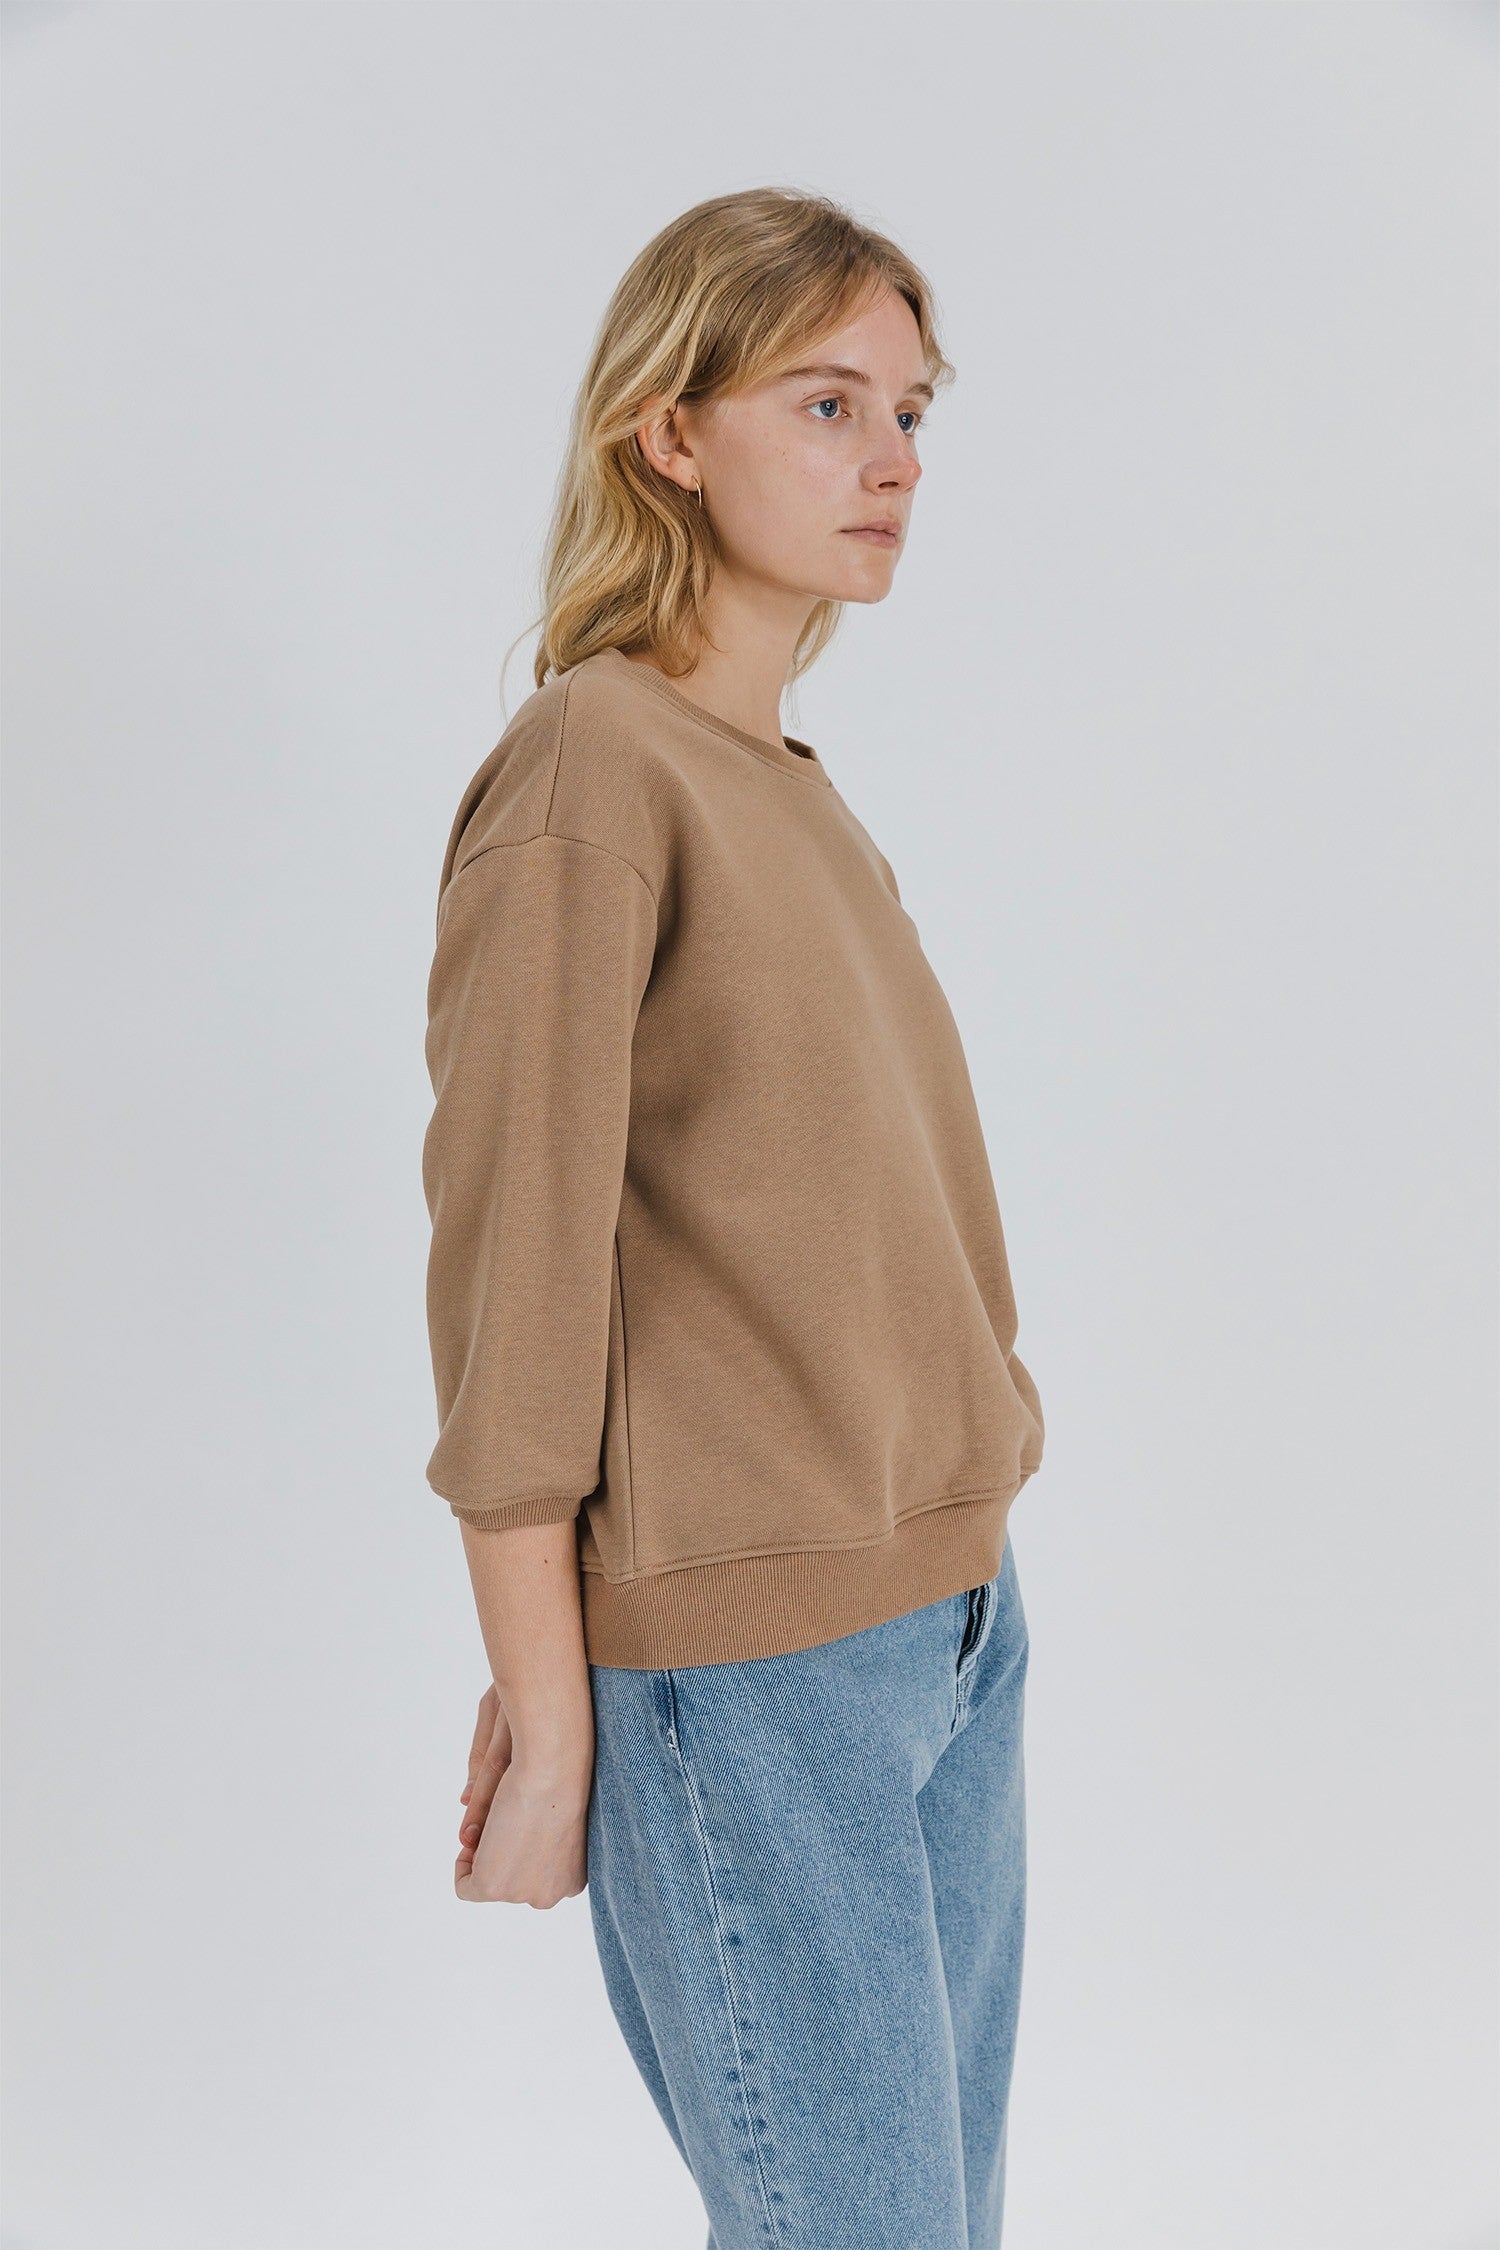 The Lois Top